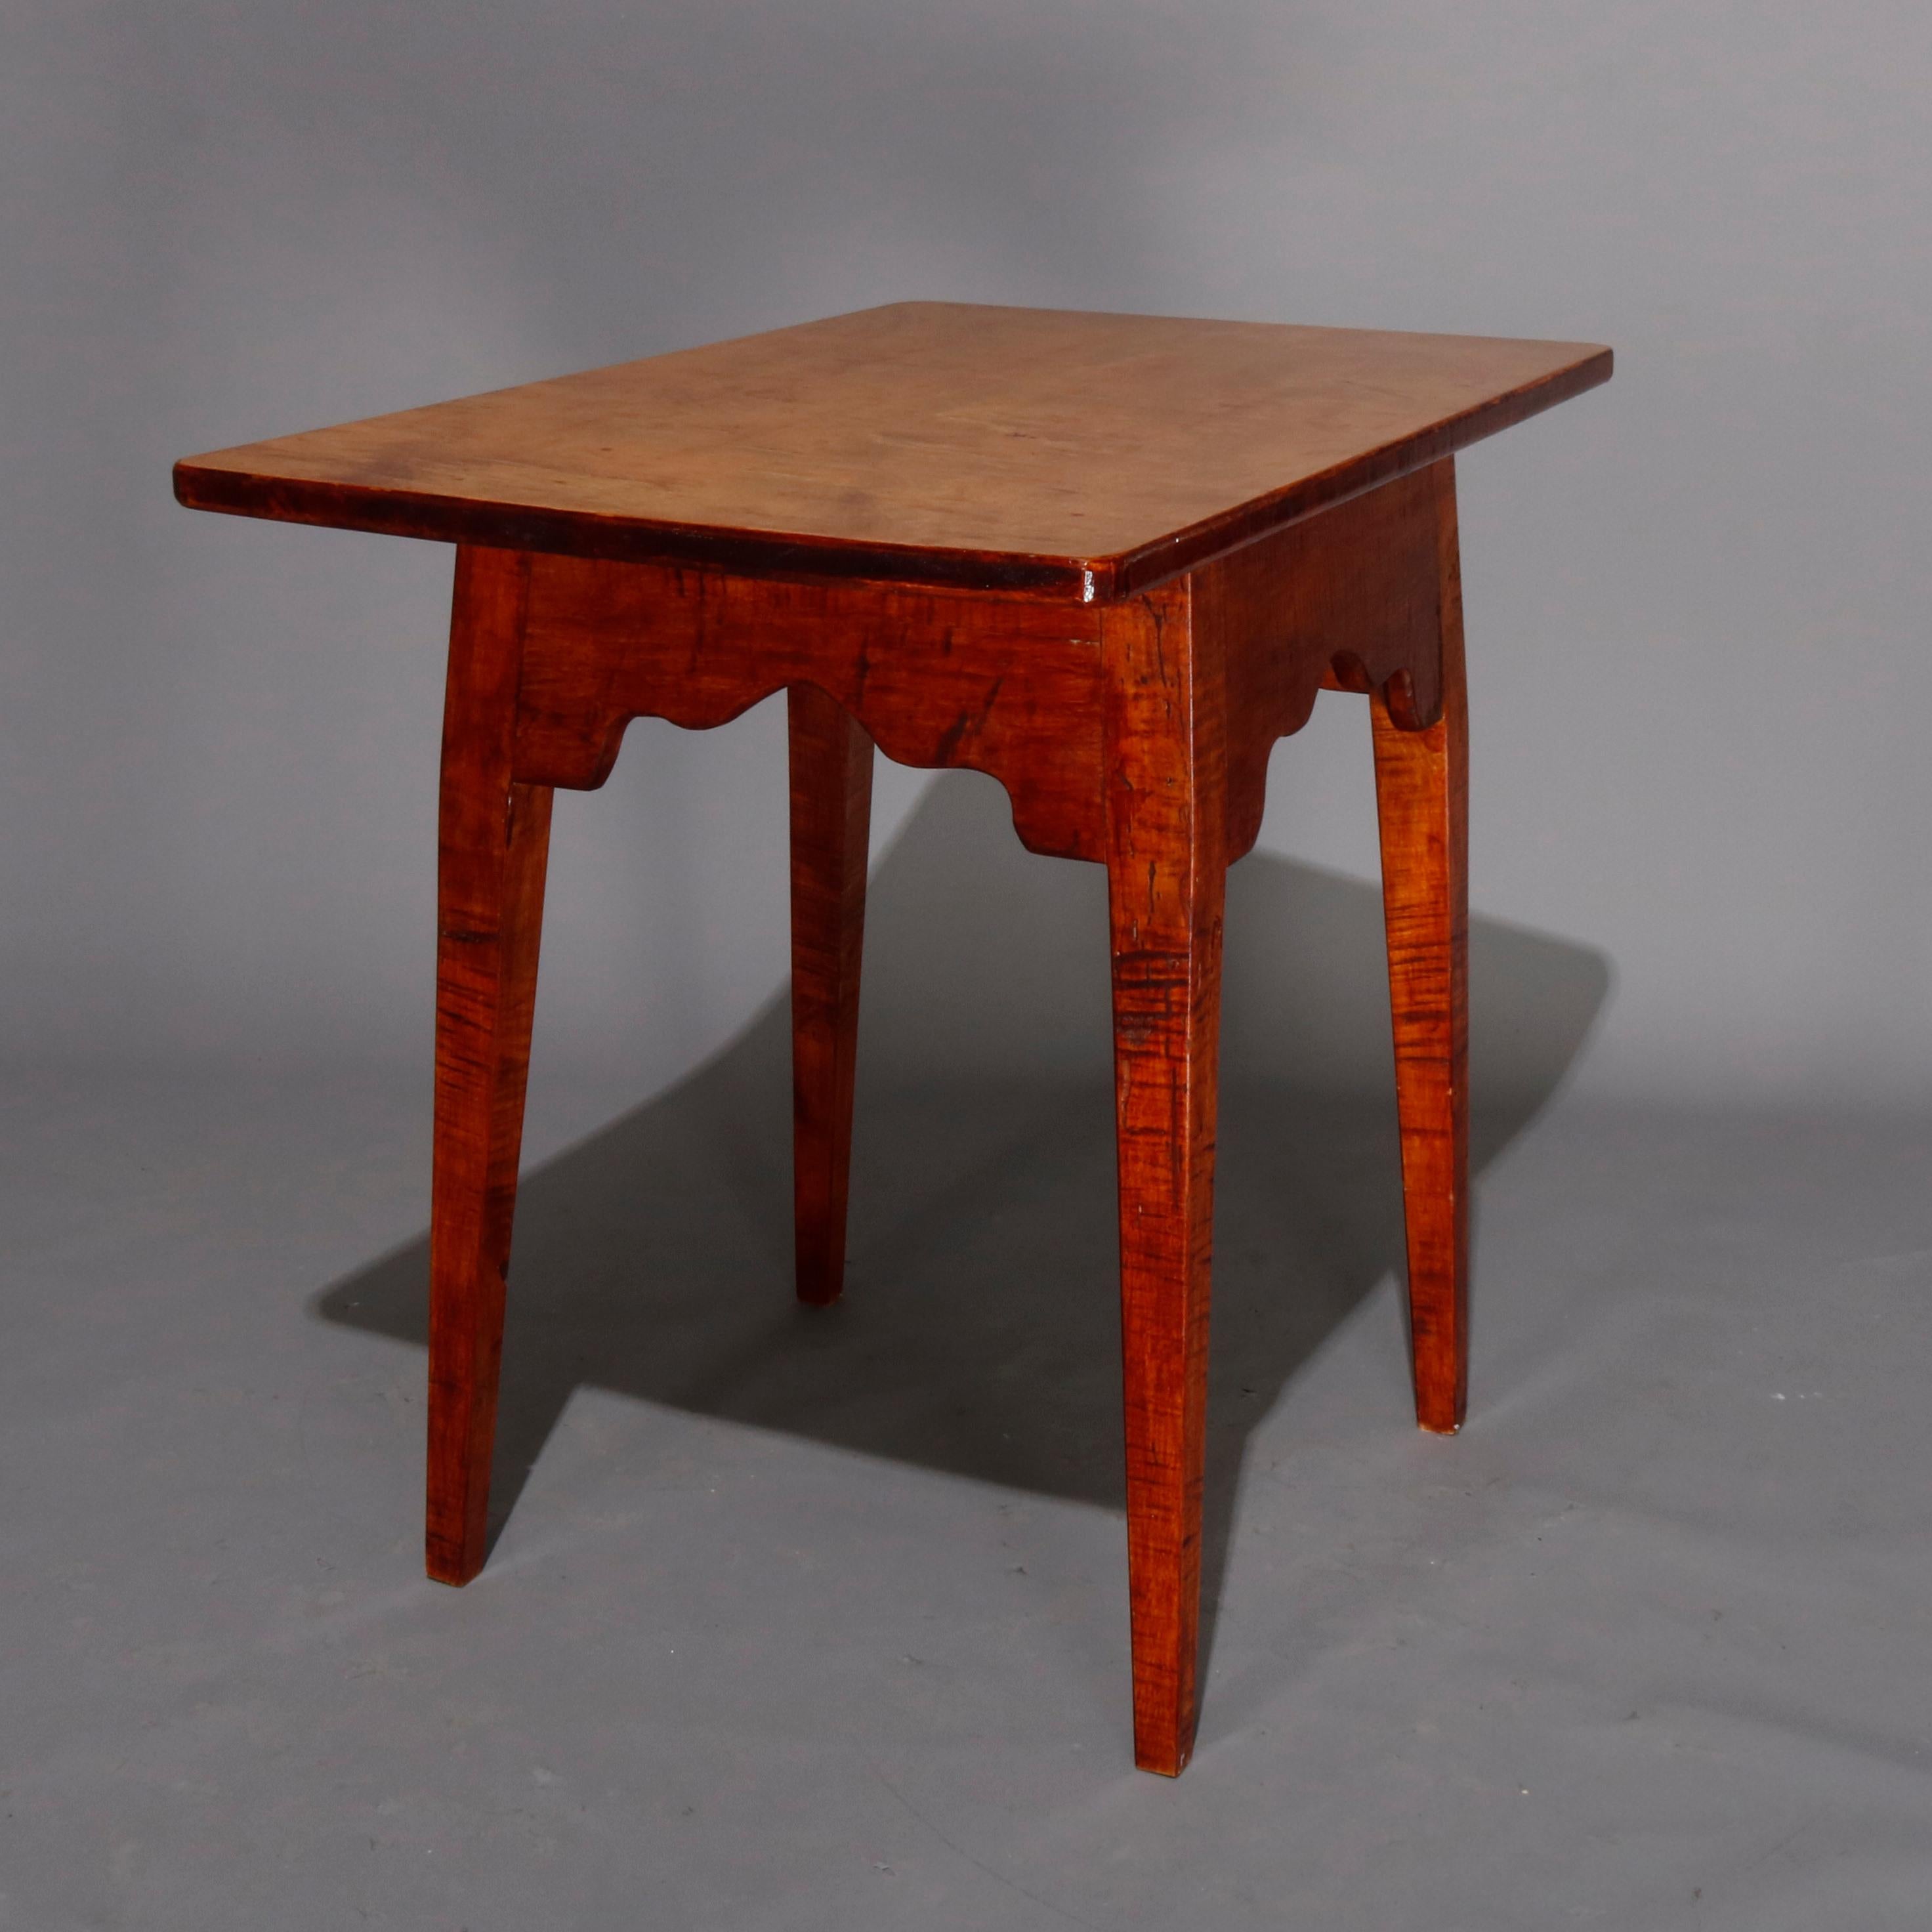 Hepplewhite style work table features tiger and bird's-eye maple construction with oversized work surface surmounting deep, shaped and flared apron and raised on tapered legs, 20th century

Measures: 30.25